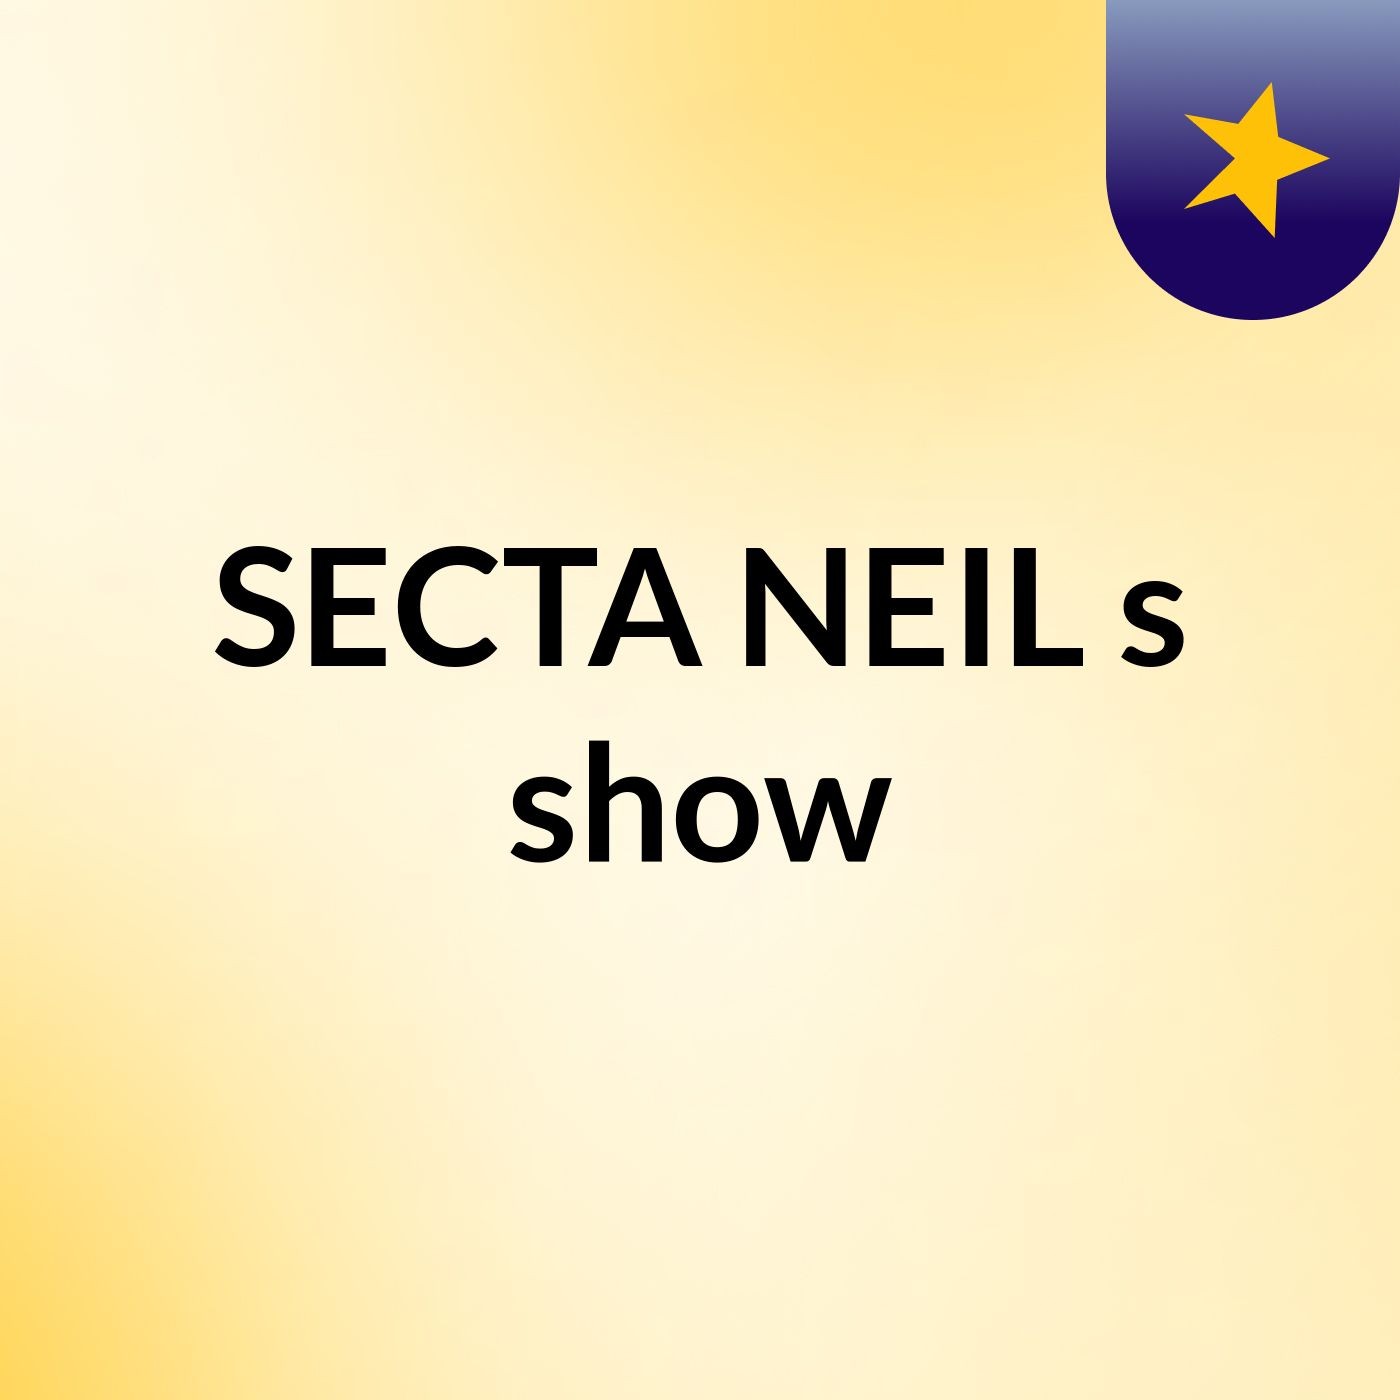 SECTA NEIL's show